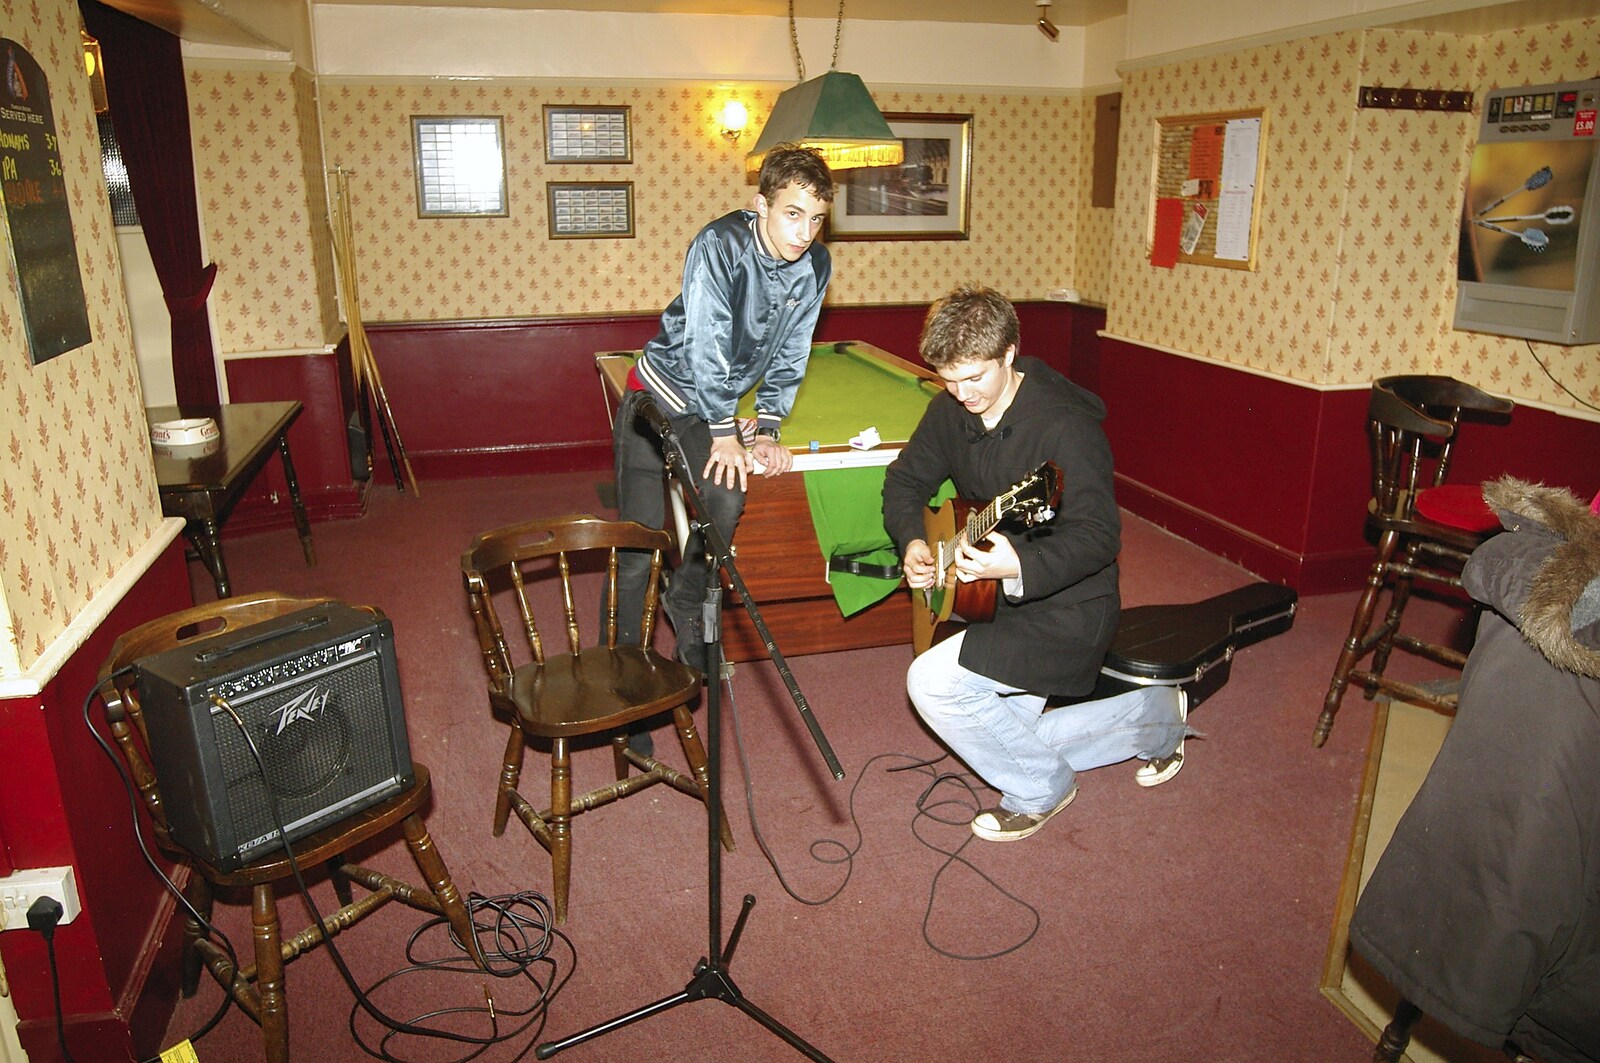 Setting up in the Mellis Railway Tavern from Rory Hill's "Tour in a Night", Norfolk and Suffolk - 17th November 2006